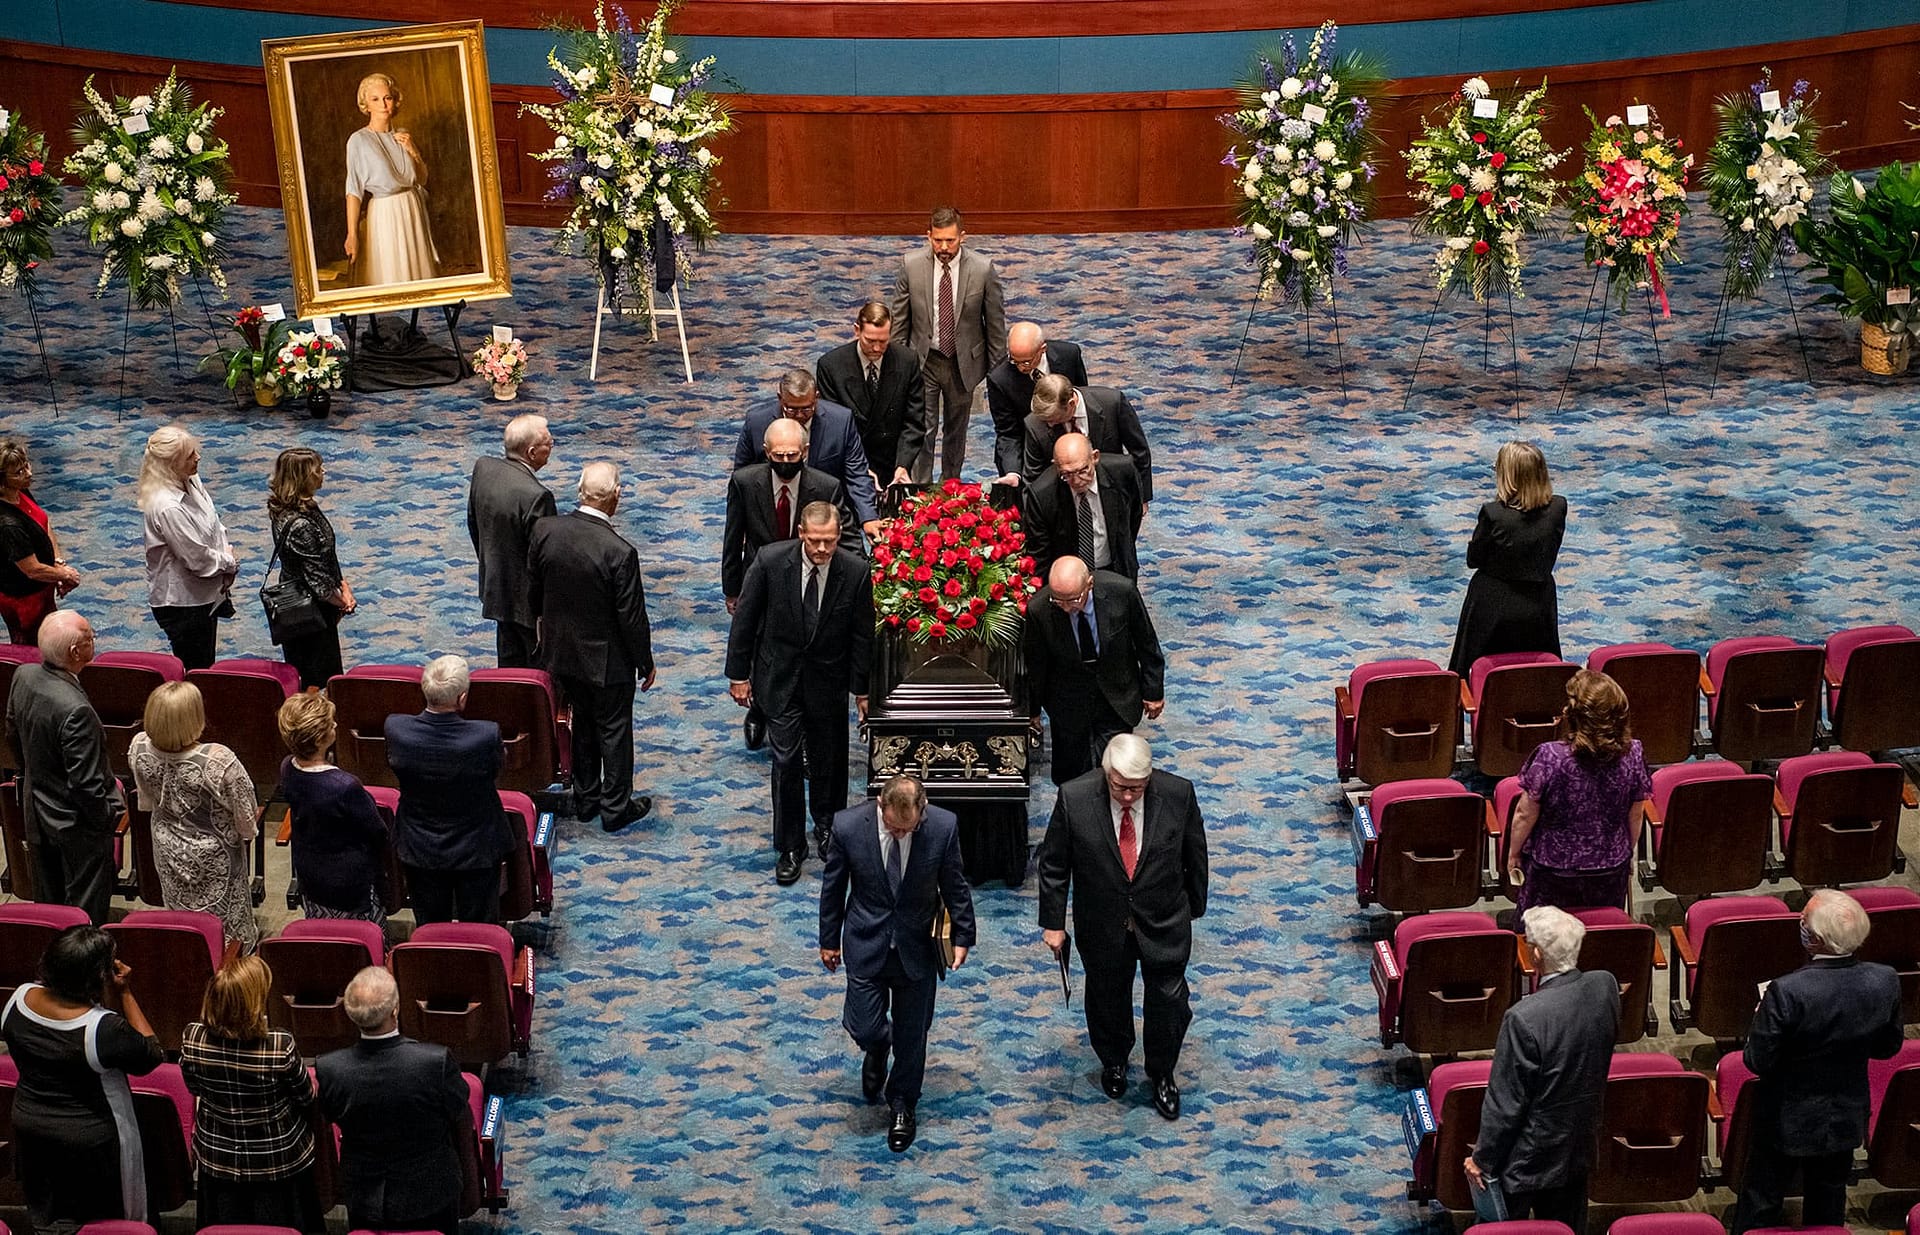 Pallbearers carrying the casket up the aisle.